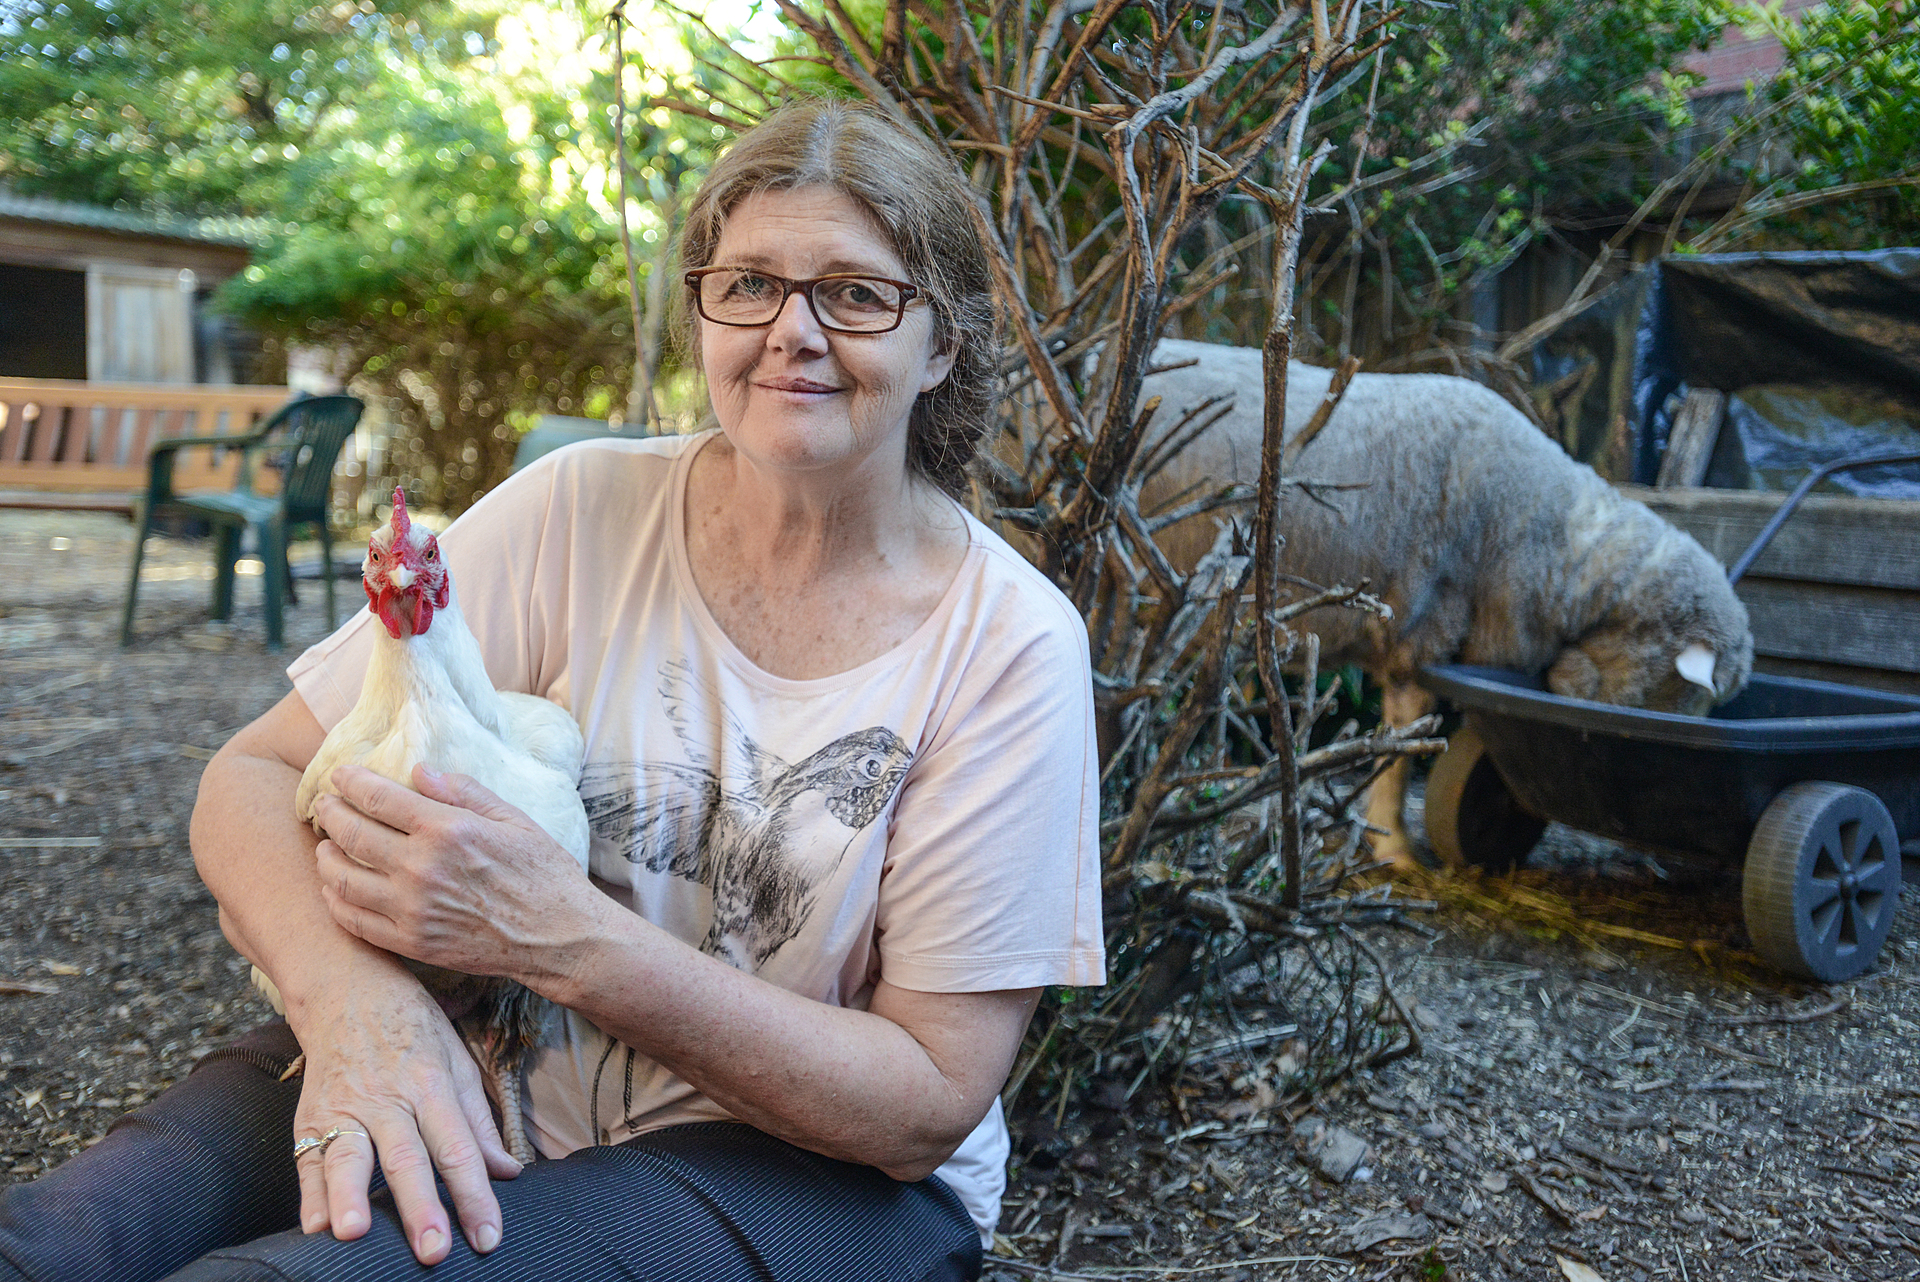 Patty Mark holds Susie, a rescued hen formerly used for breeding in the broiler chicken industry. In the background, Prince, a rescued sheep born inside a slaughterhouse, snuffles through the contents of a wheelbarrow. Australia, 2013. Jo-Anne McArthur / Animal Liberation Victoria / We Animals